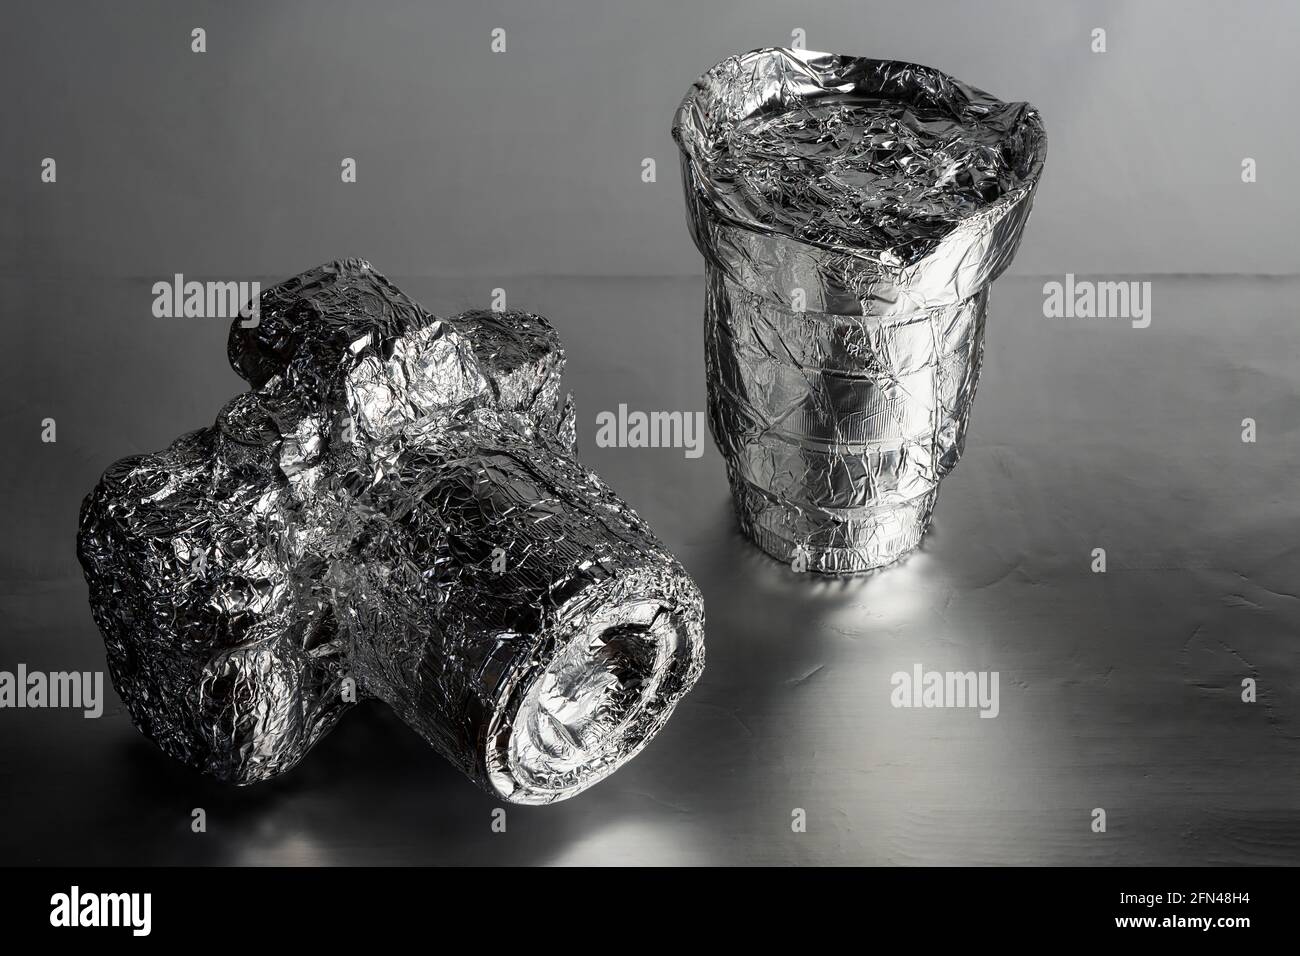 https://c8.alamy.com/comp/2FN48H4/a-camera-and-a-lens-wrapped-in-aluminum-foil-2FN48H4.jpg